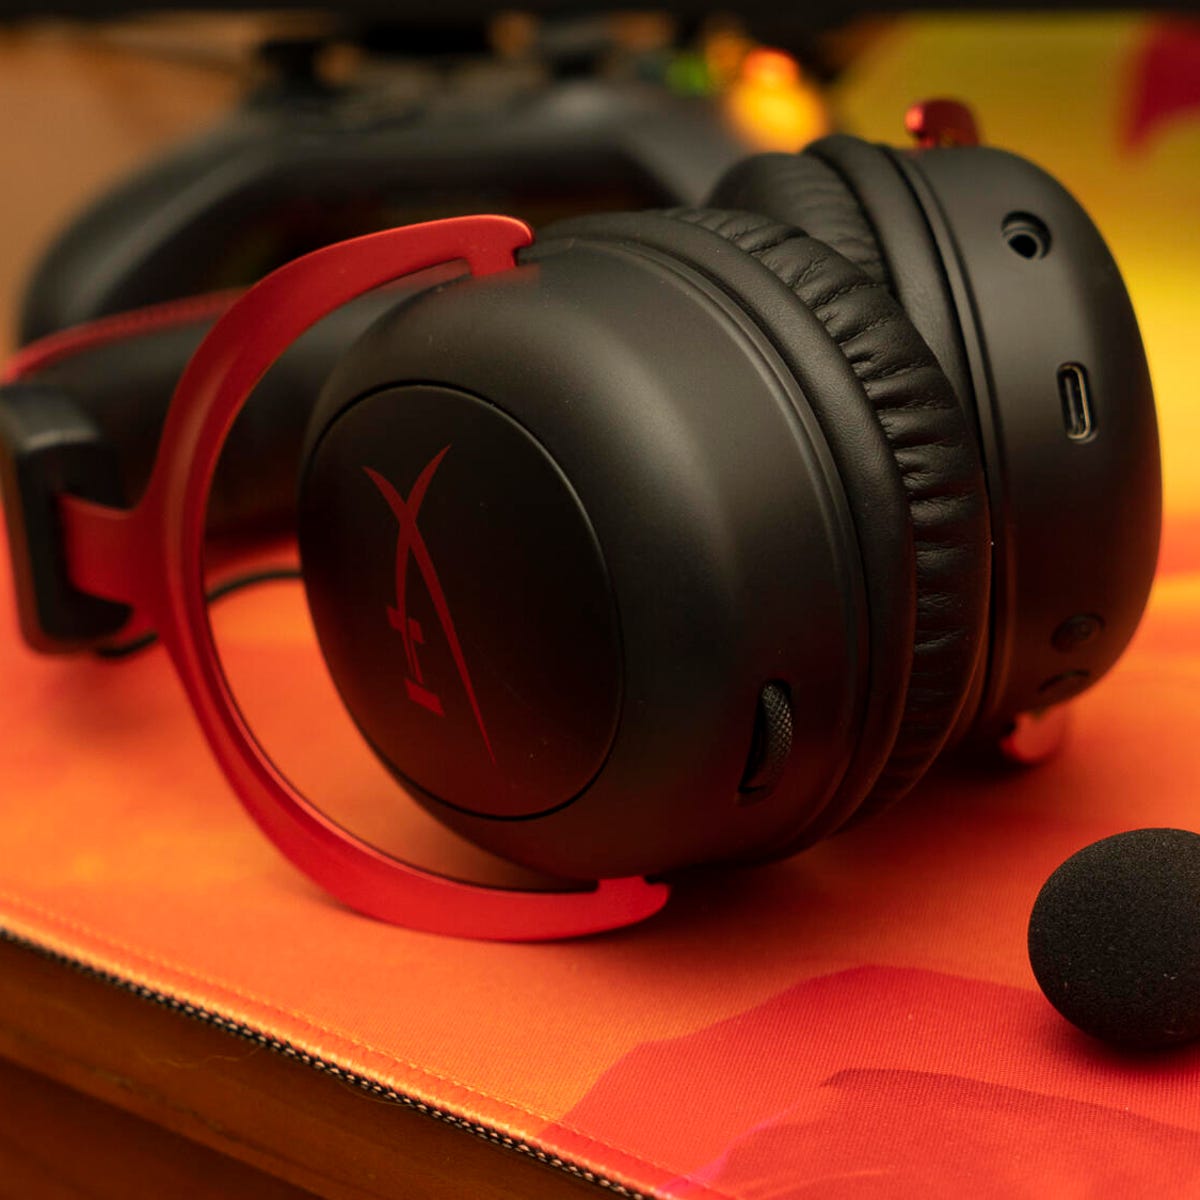 HyperX Cloud 2 wireless gaming headset is comfy but basic for the